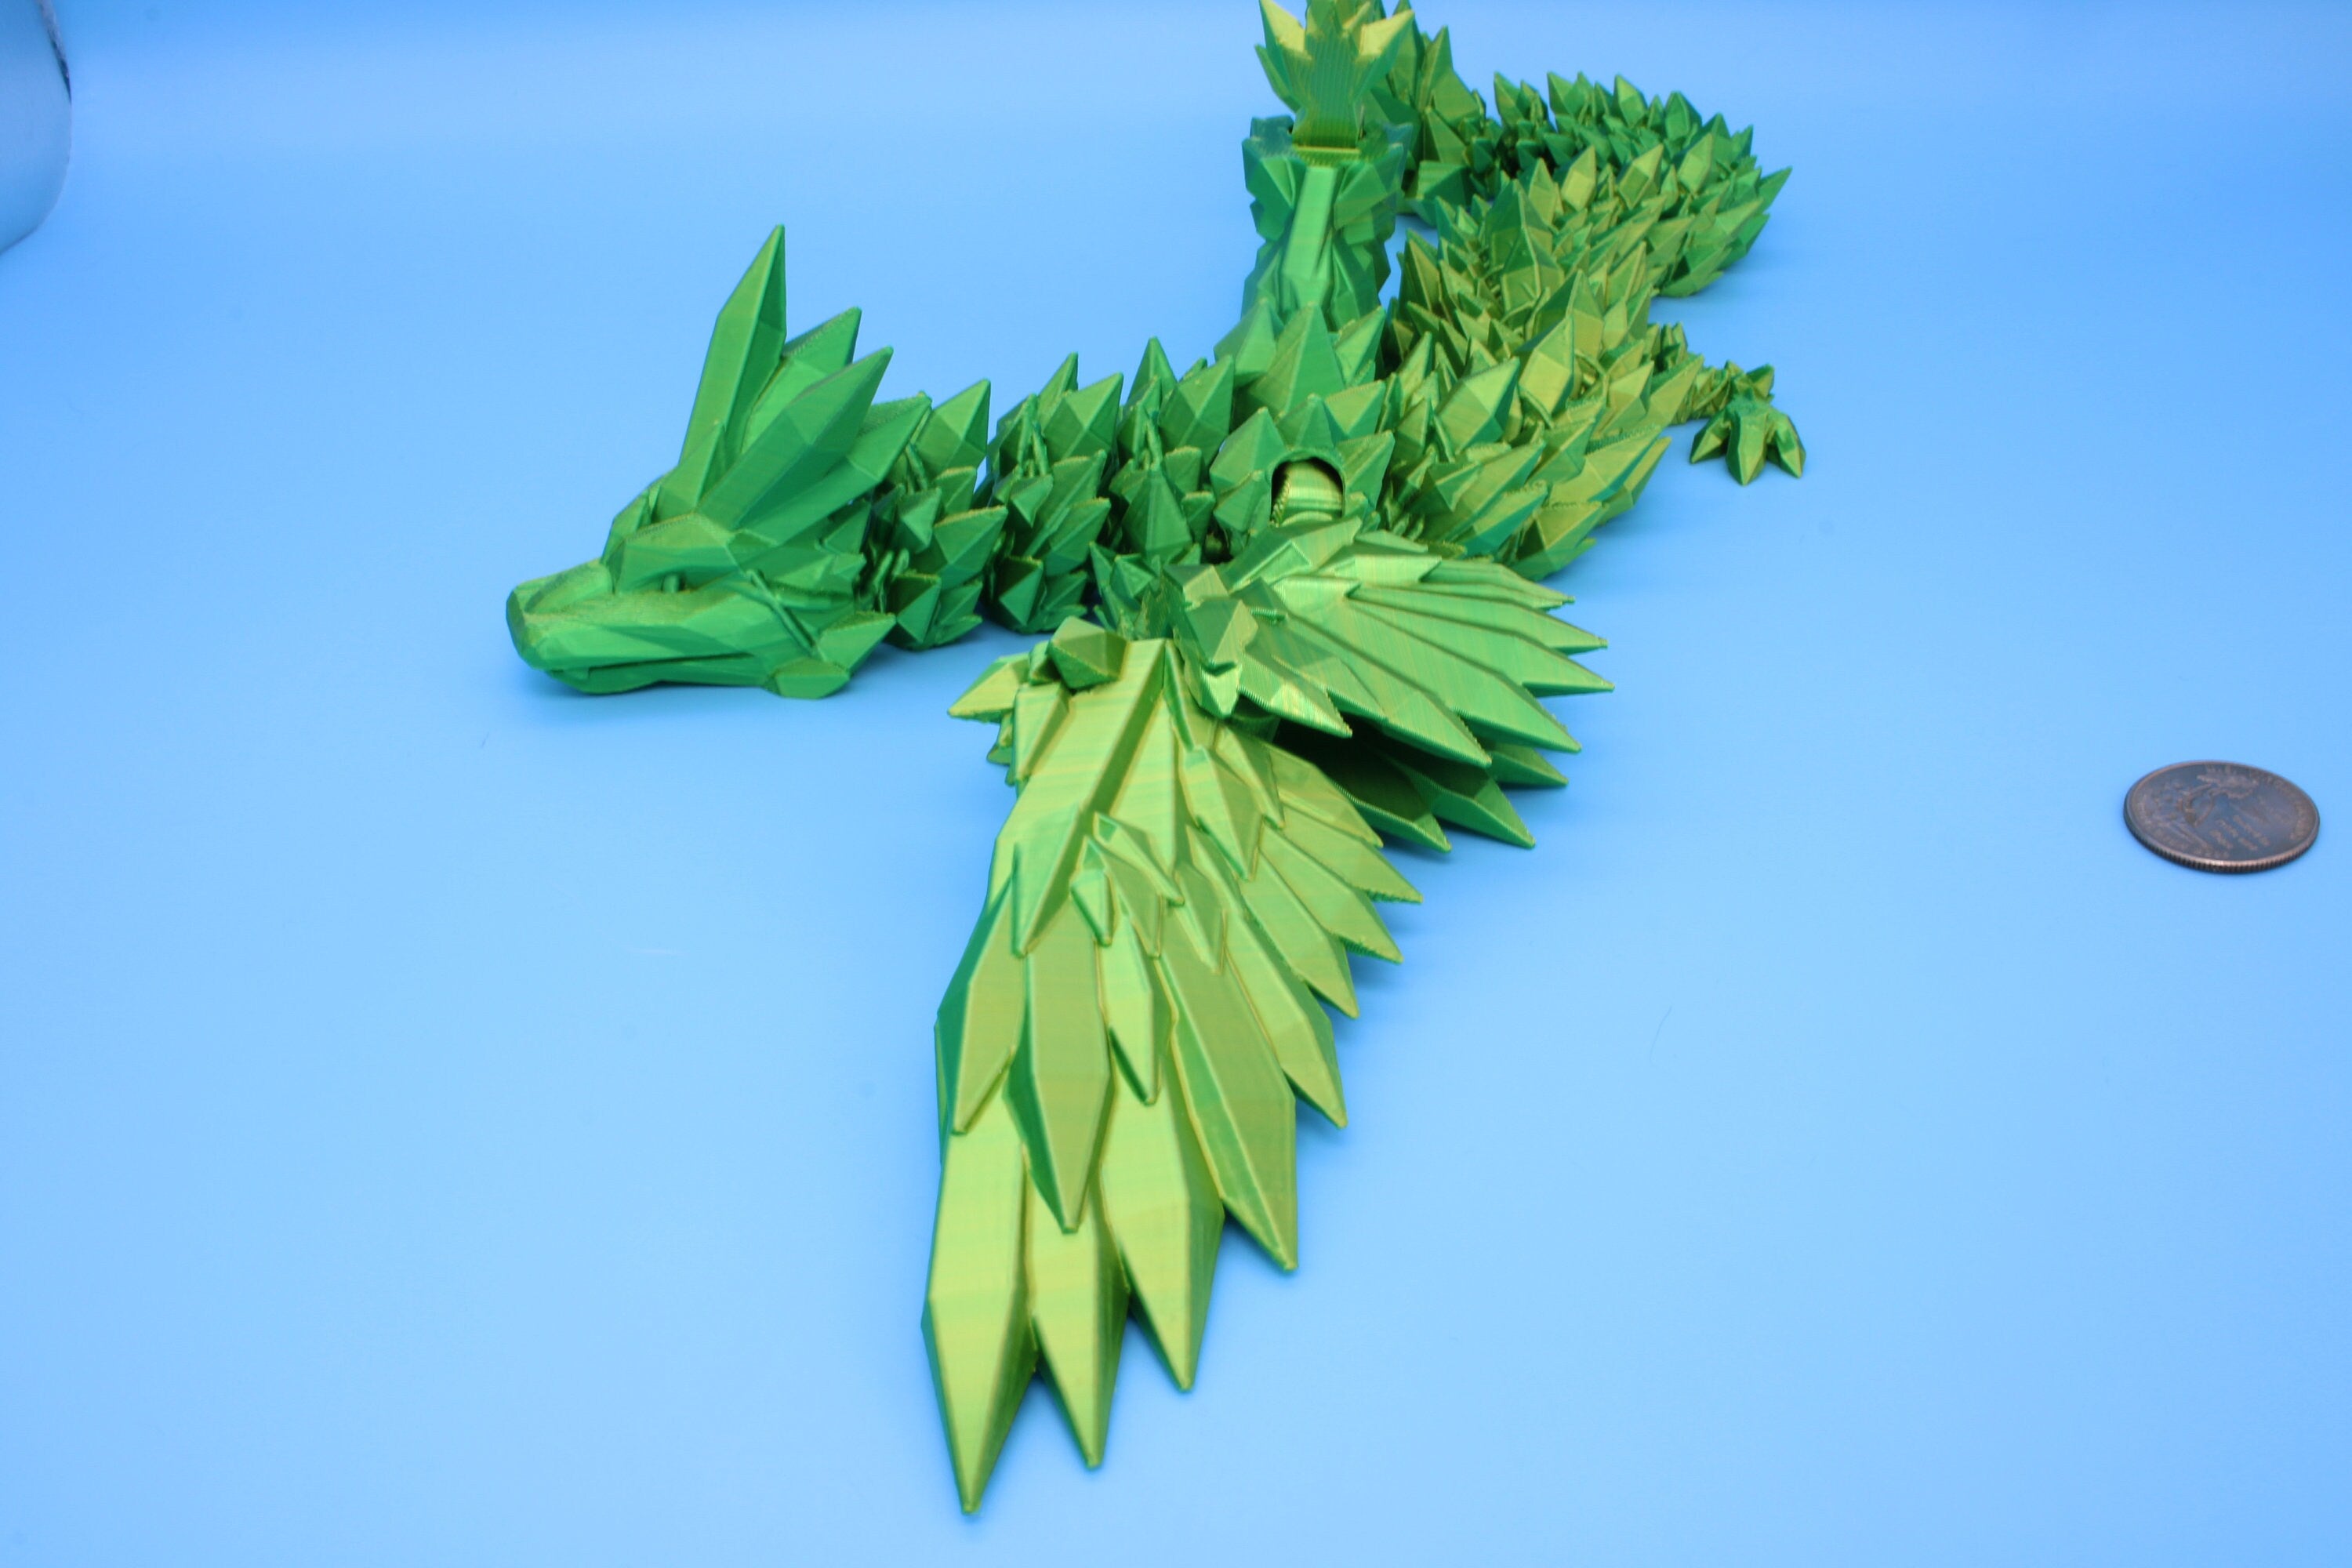 Crystal Wing Dragon | Green / Yellow Shift | 3D printed 18 in